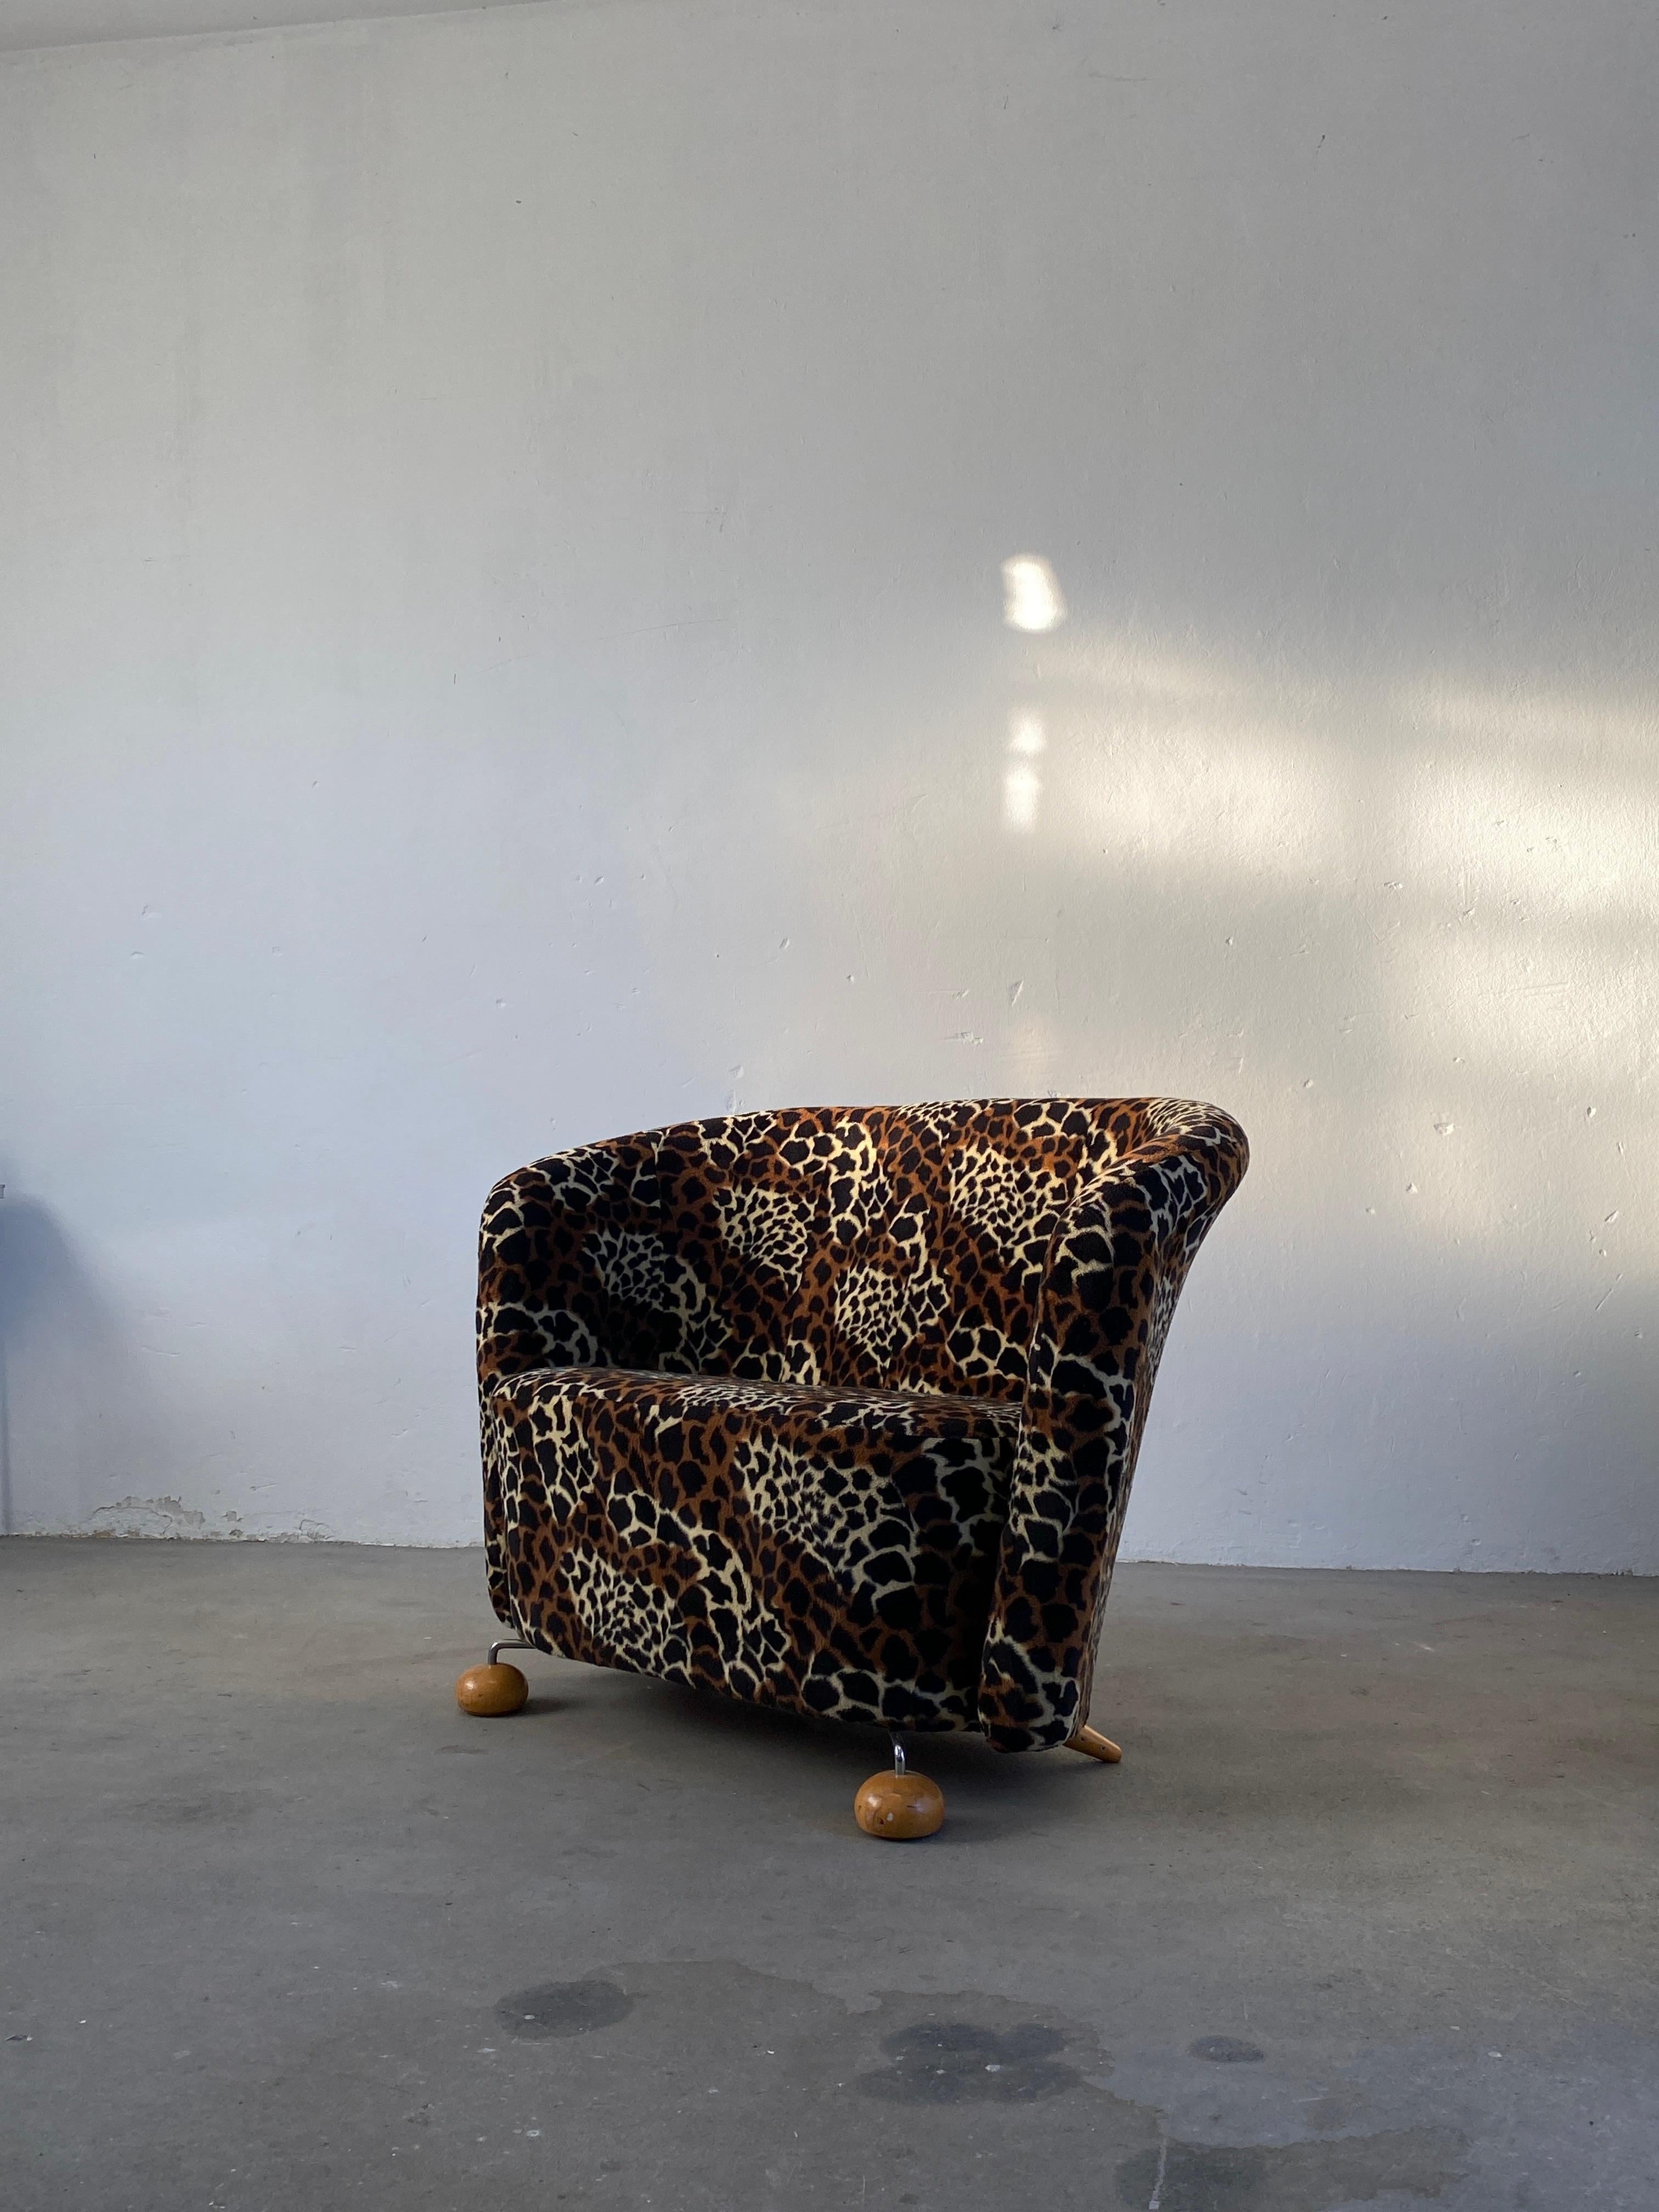 A unique, vintage produced postmodernist loveseat upholstered in leopard pattern fabric.
Produced during the 1980s/1990s.

In very good vintage condition, with some expected signs of age. Structurally excellent. No tears or holes on the